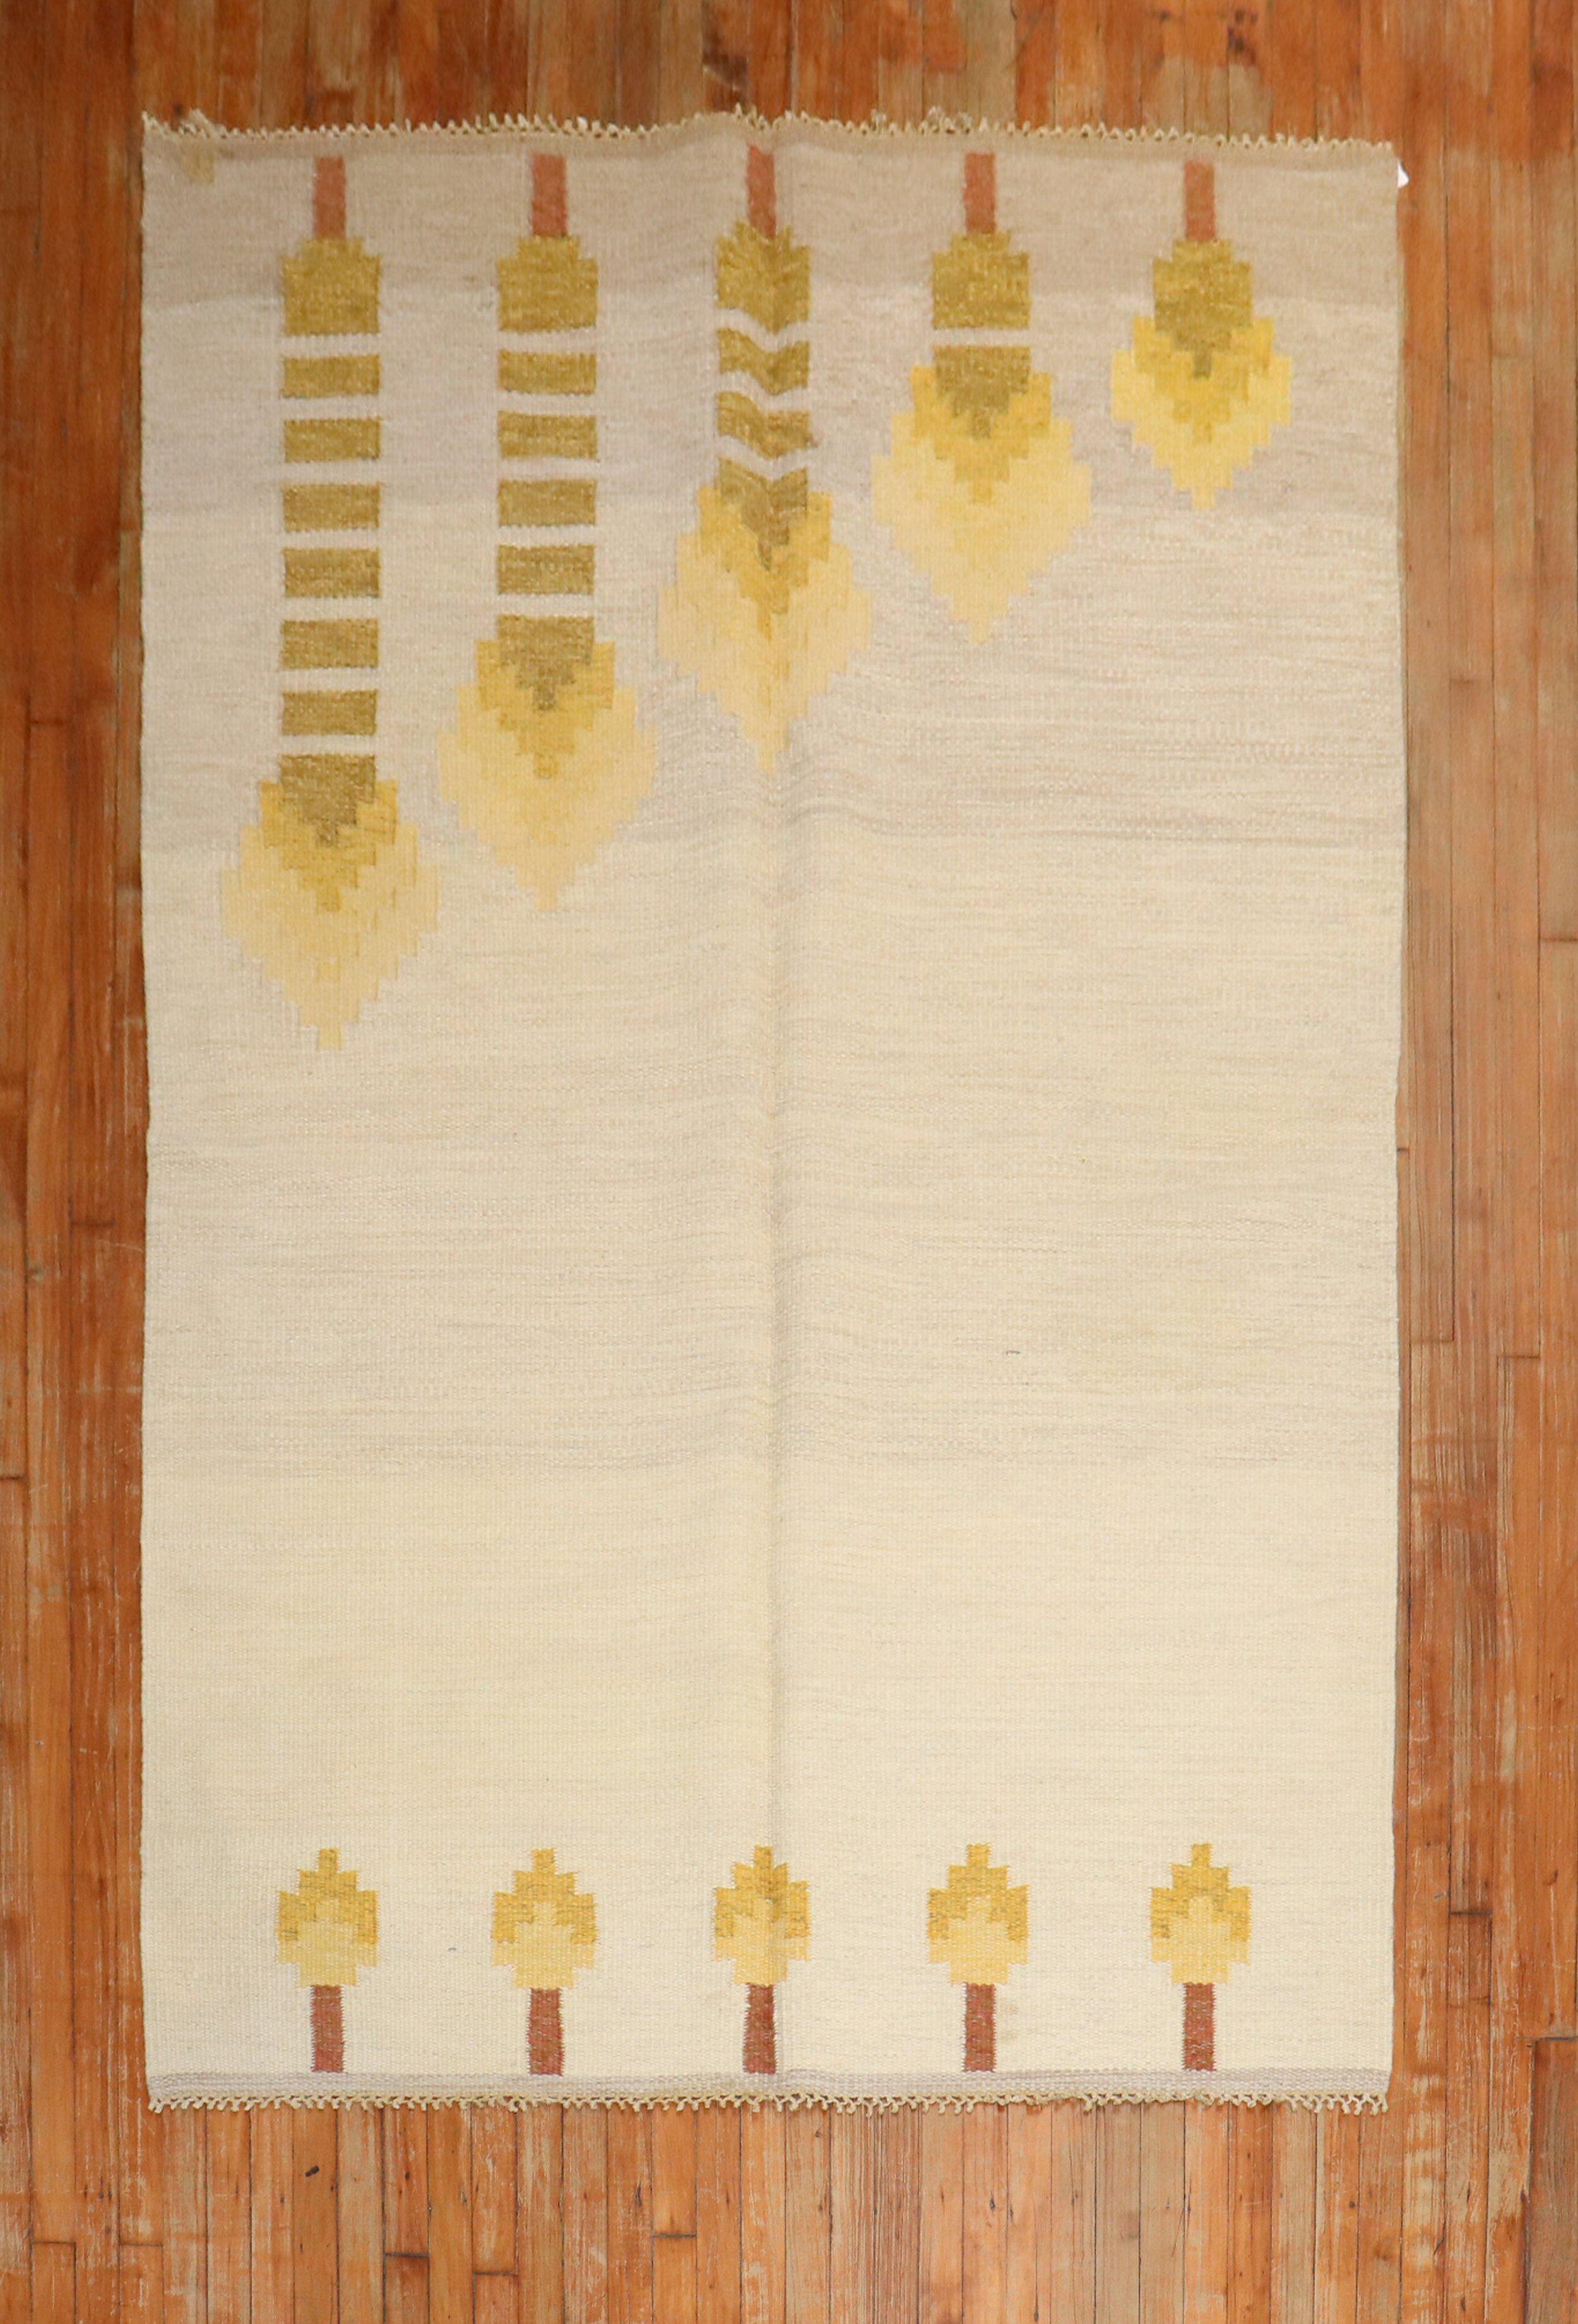 Scandinavian flatweave carpet from the middle of the 20th century.

Measures: 5'5'' x 8'4''.